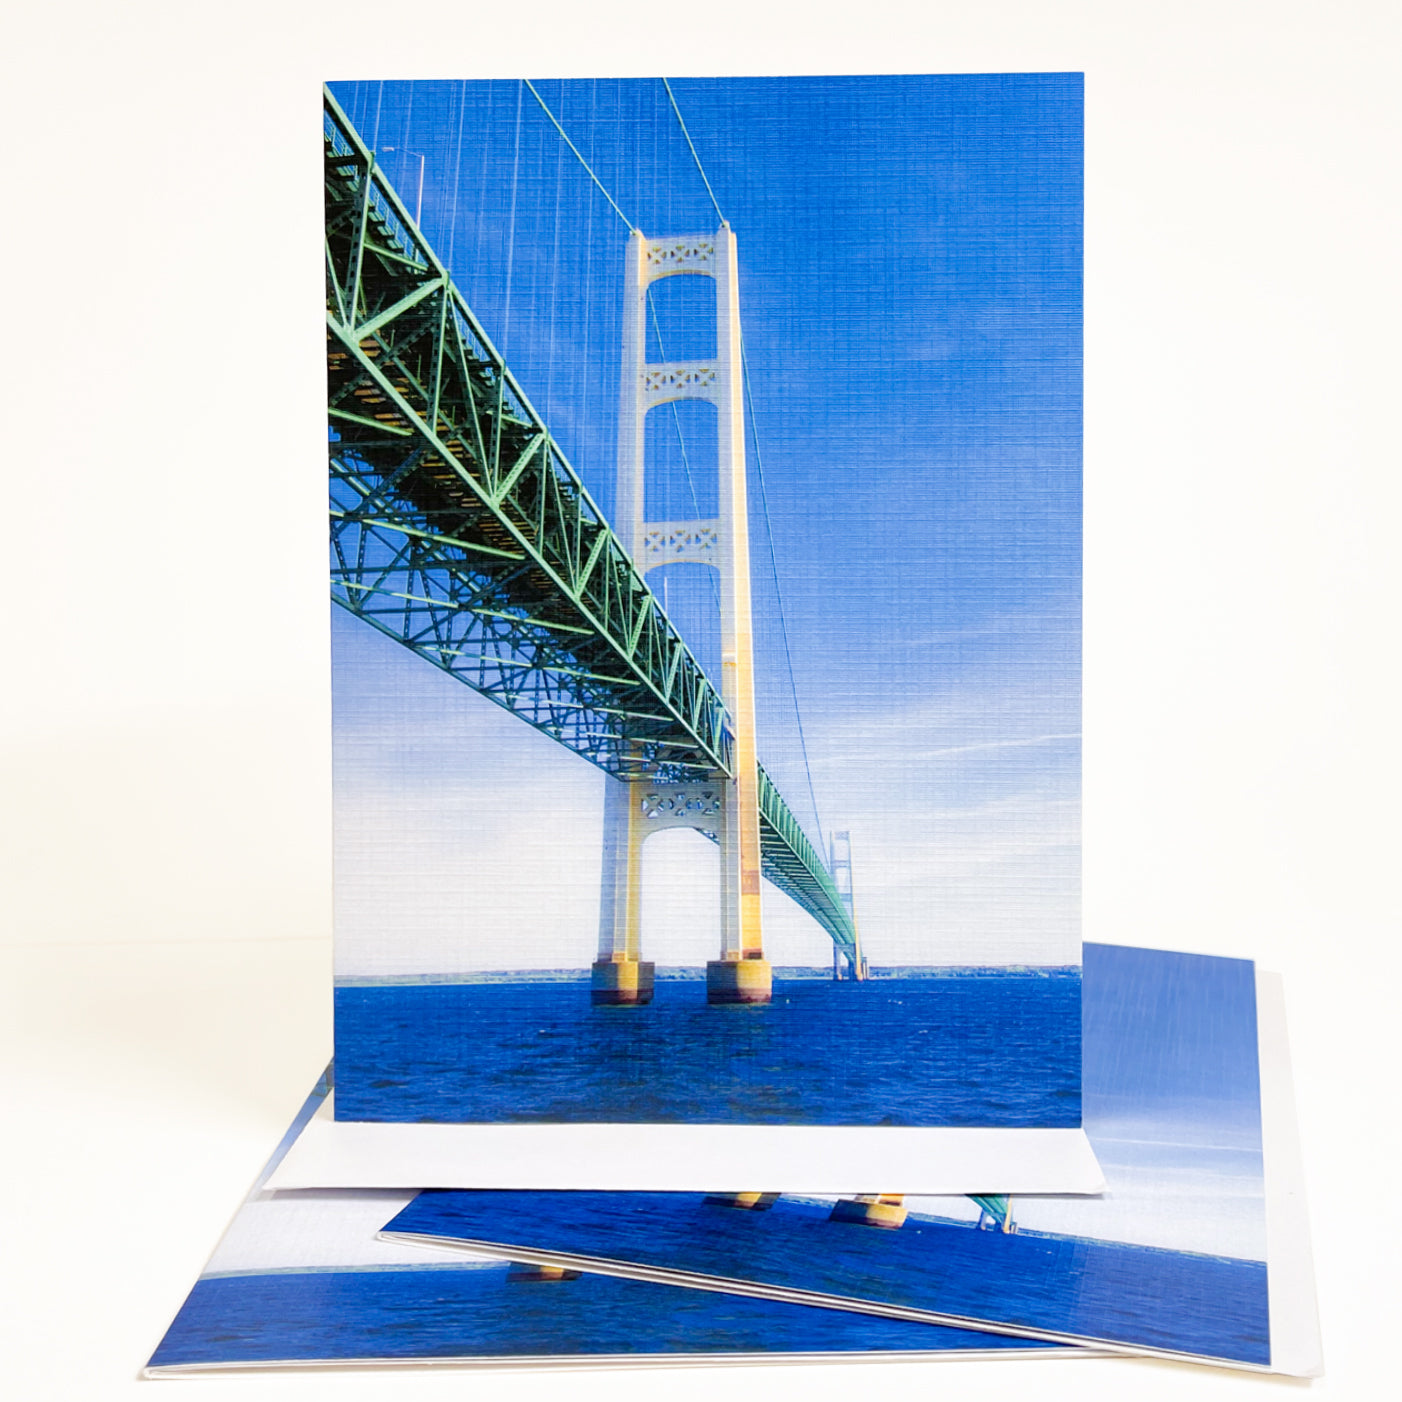 Blank greeting card featuring a photograph of the Mackinac Bridge by Michigan artist Jennifer Wohletz of Mackinac Memories.  Looking up at the Mackinac Bridge from the water reveals the mammoth size of the bridge's towers that anchor it to the bottom of the lake. Open the card to discover an interesting perspective of the bridge's strong foundation. Photos by Jennifer Wohletz.  The card is meant to be shared or displayed as a work of art.  